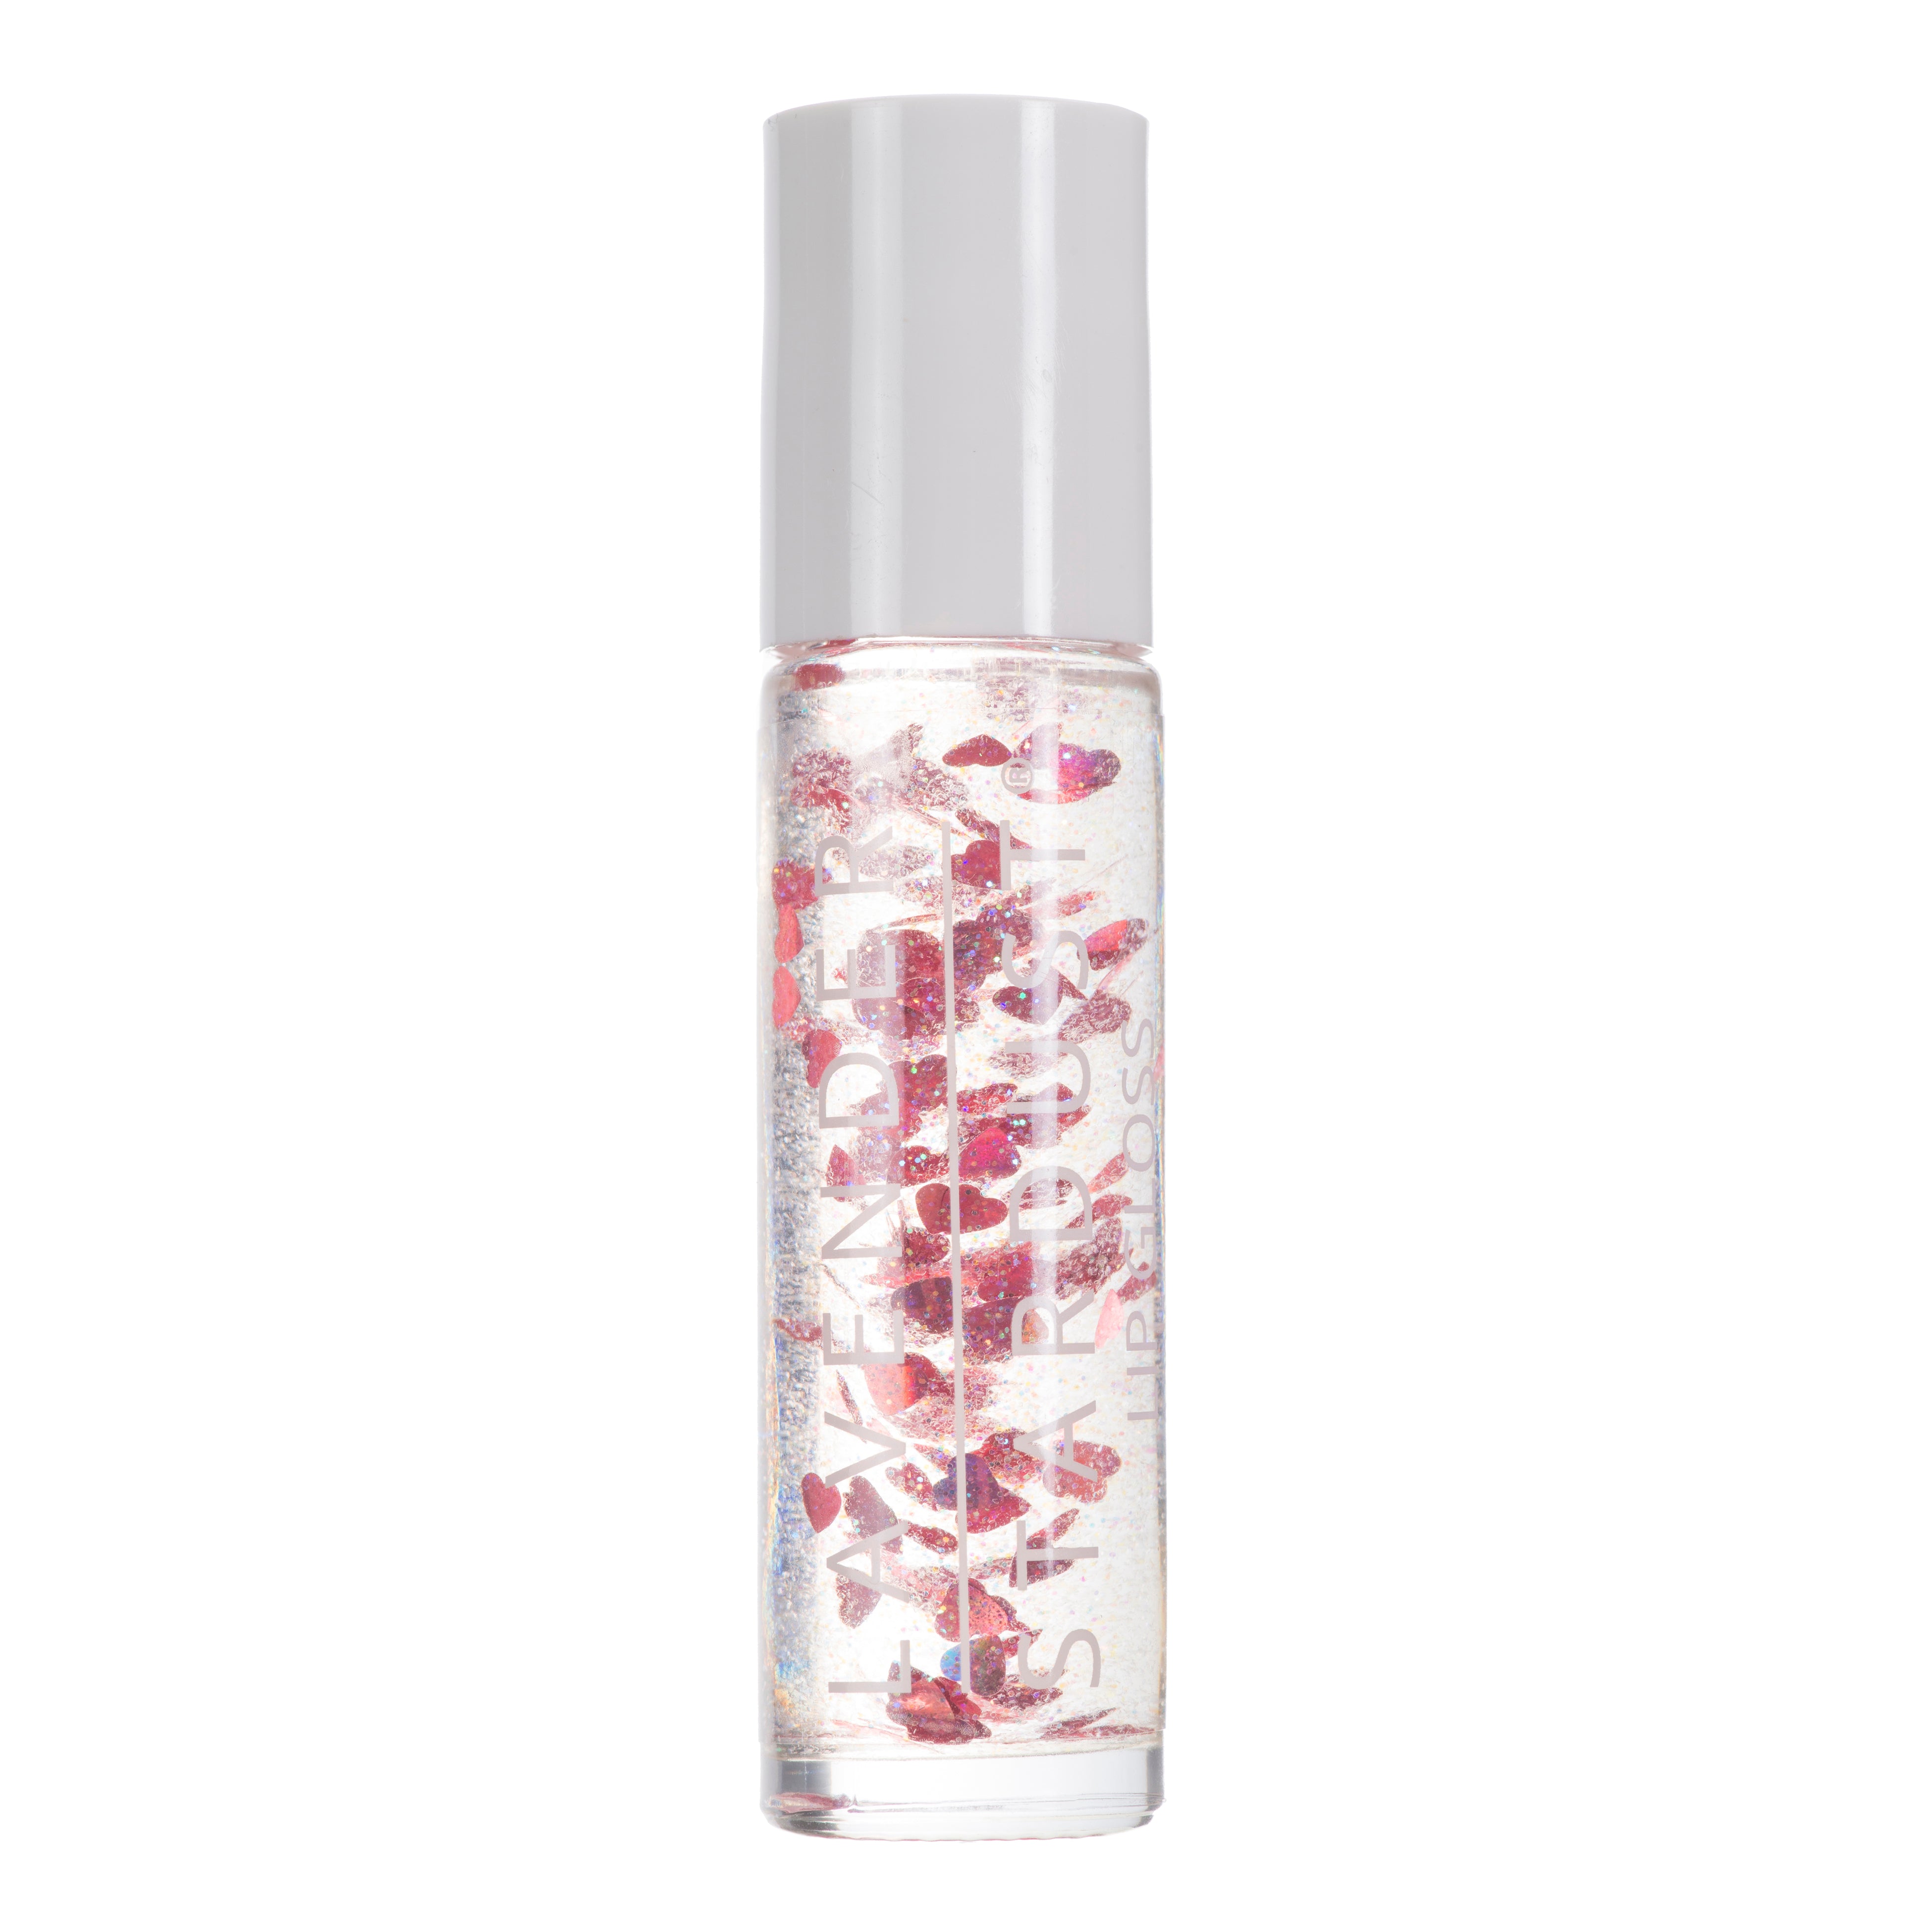 KISSING GLITTER LIP GLOSS in Red Hearts Cherry Stardust